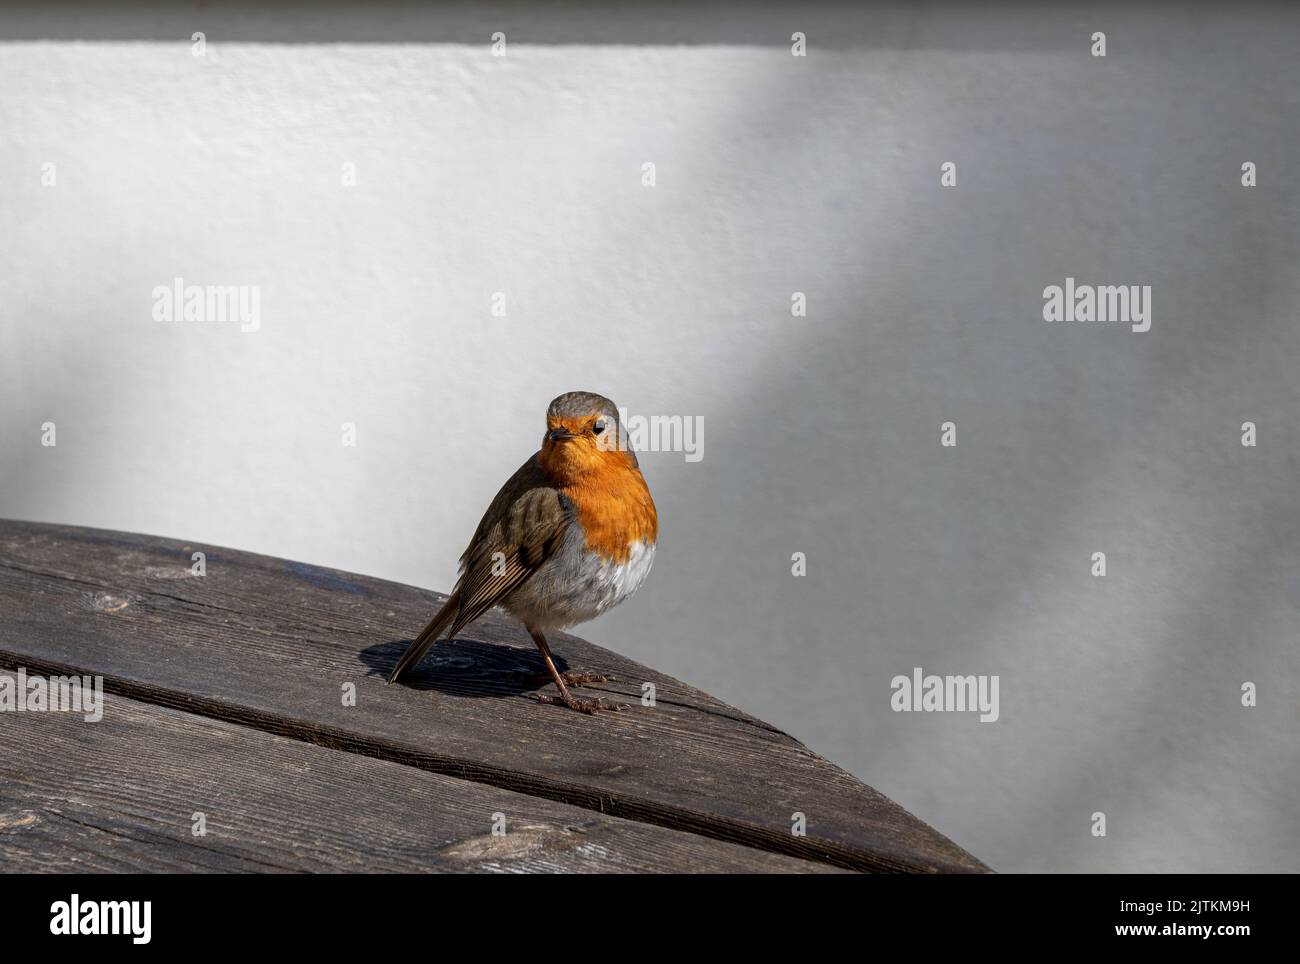 Robin on a wooden patio table Stock Photo